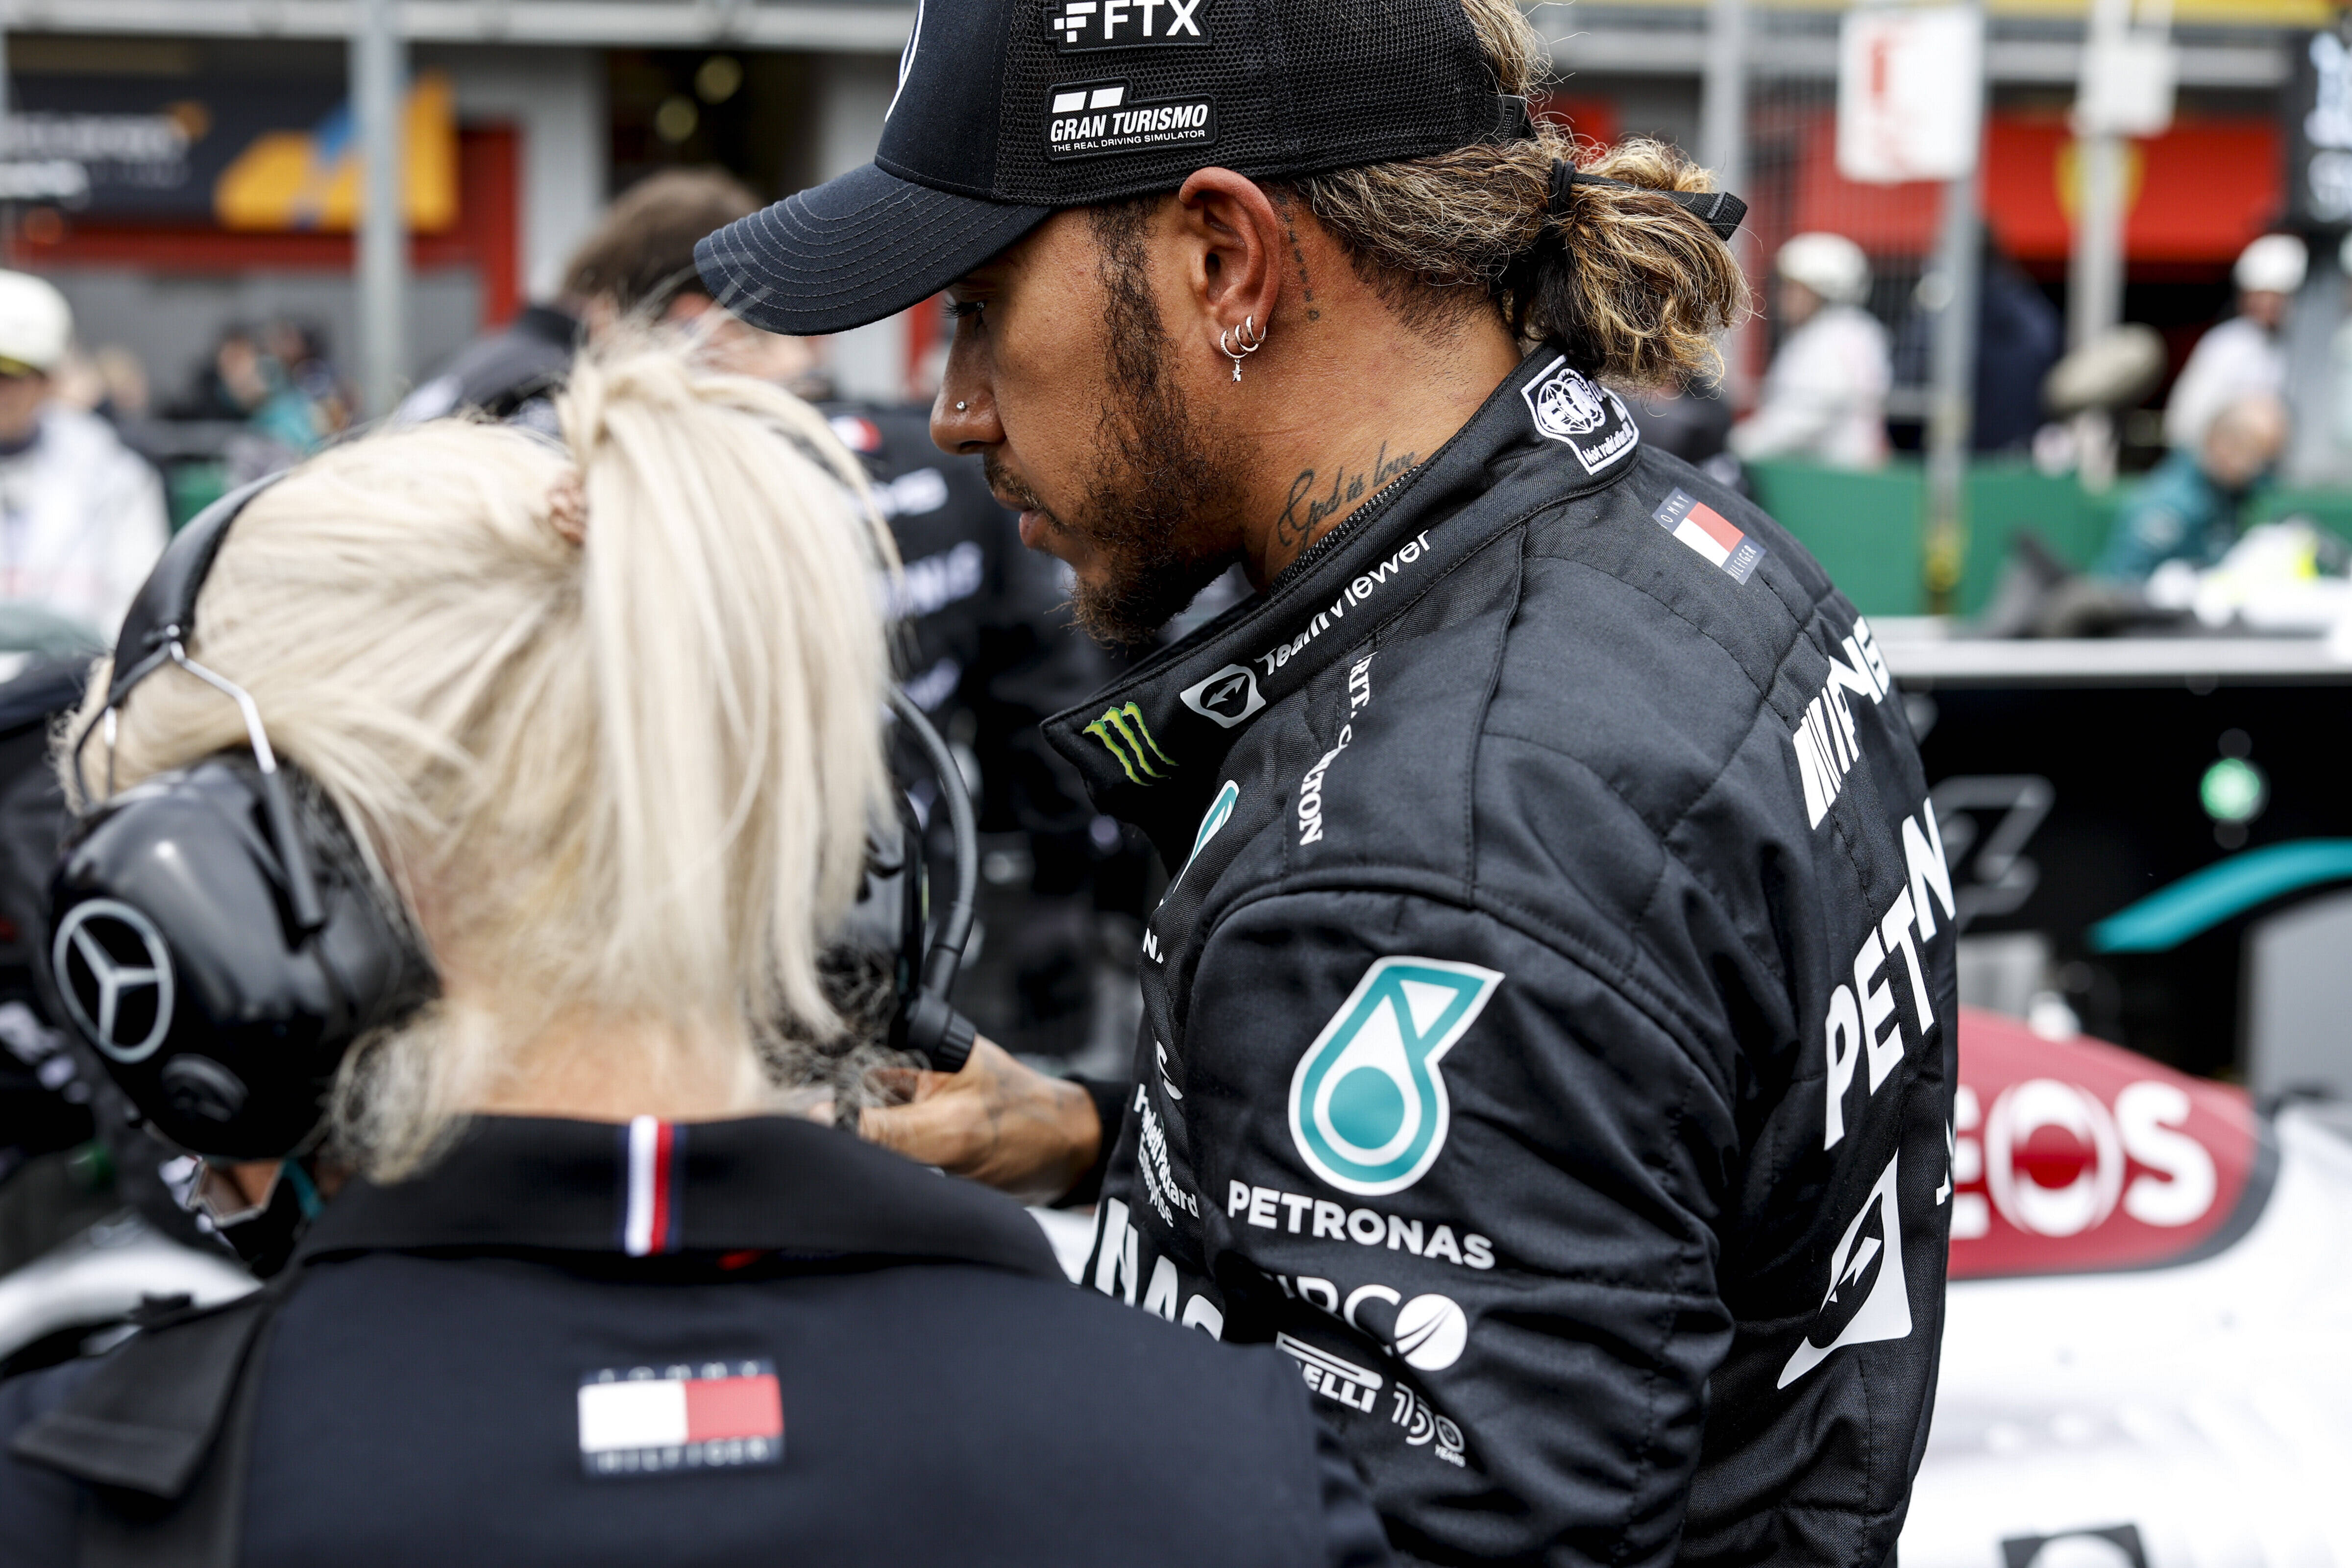 Sir Lewis Hamilton ruled himself out of this season's championship title following the disappointment at Imola